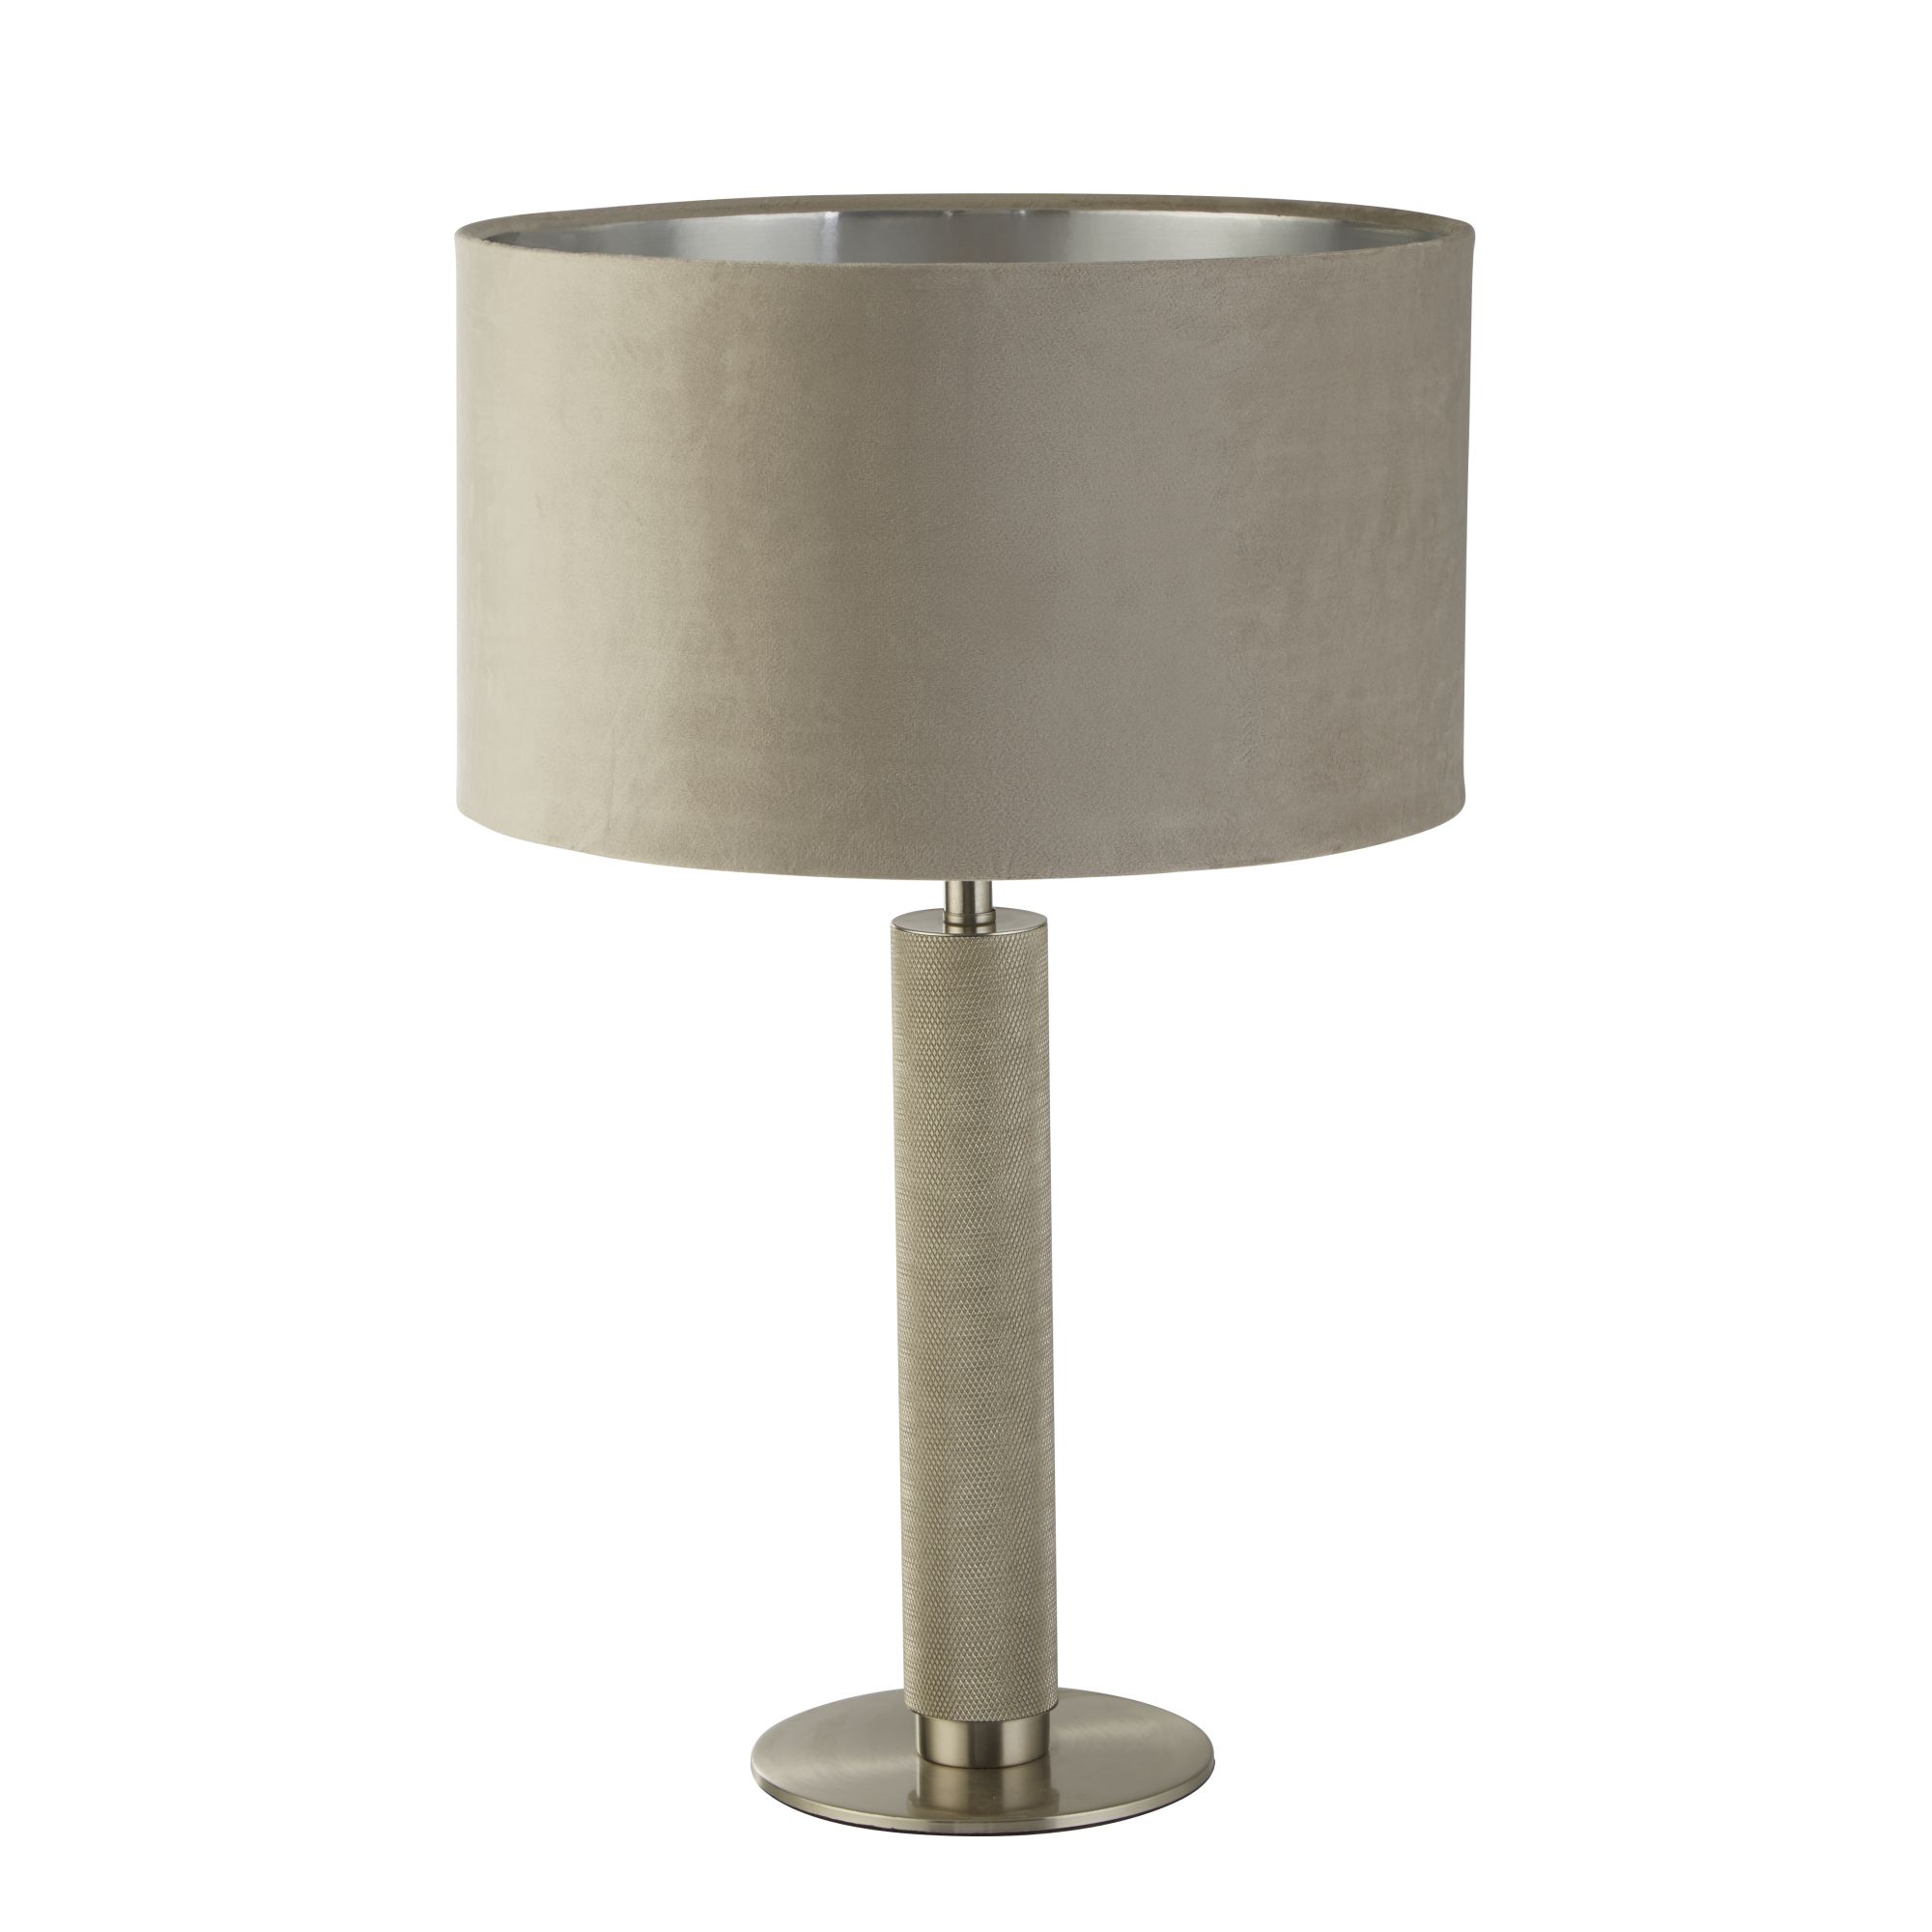 London Table Lamp- Knurled Satin Silver & Taupe Velvet Shade